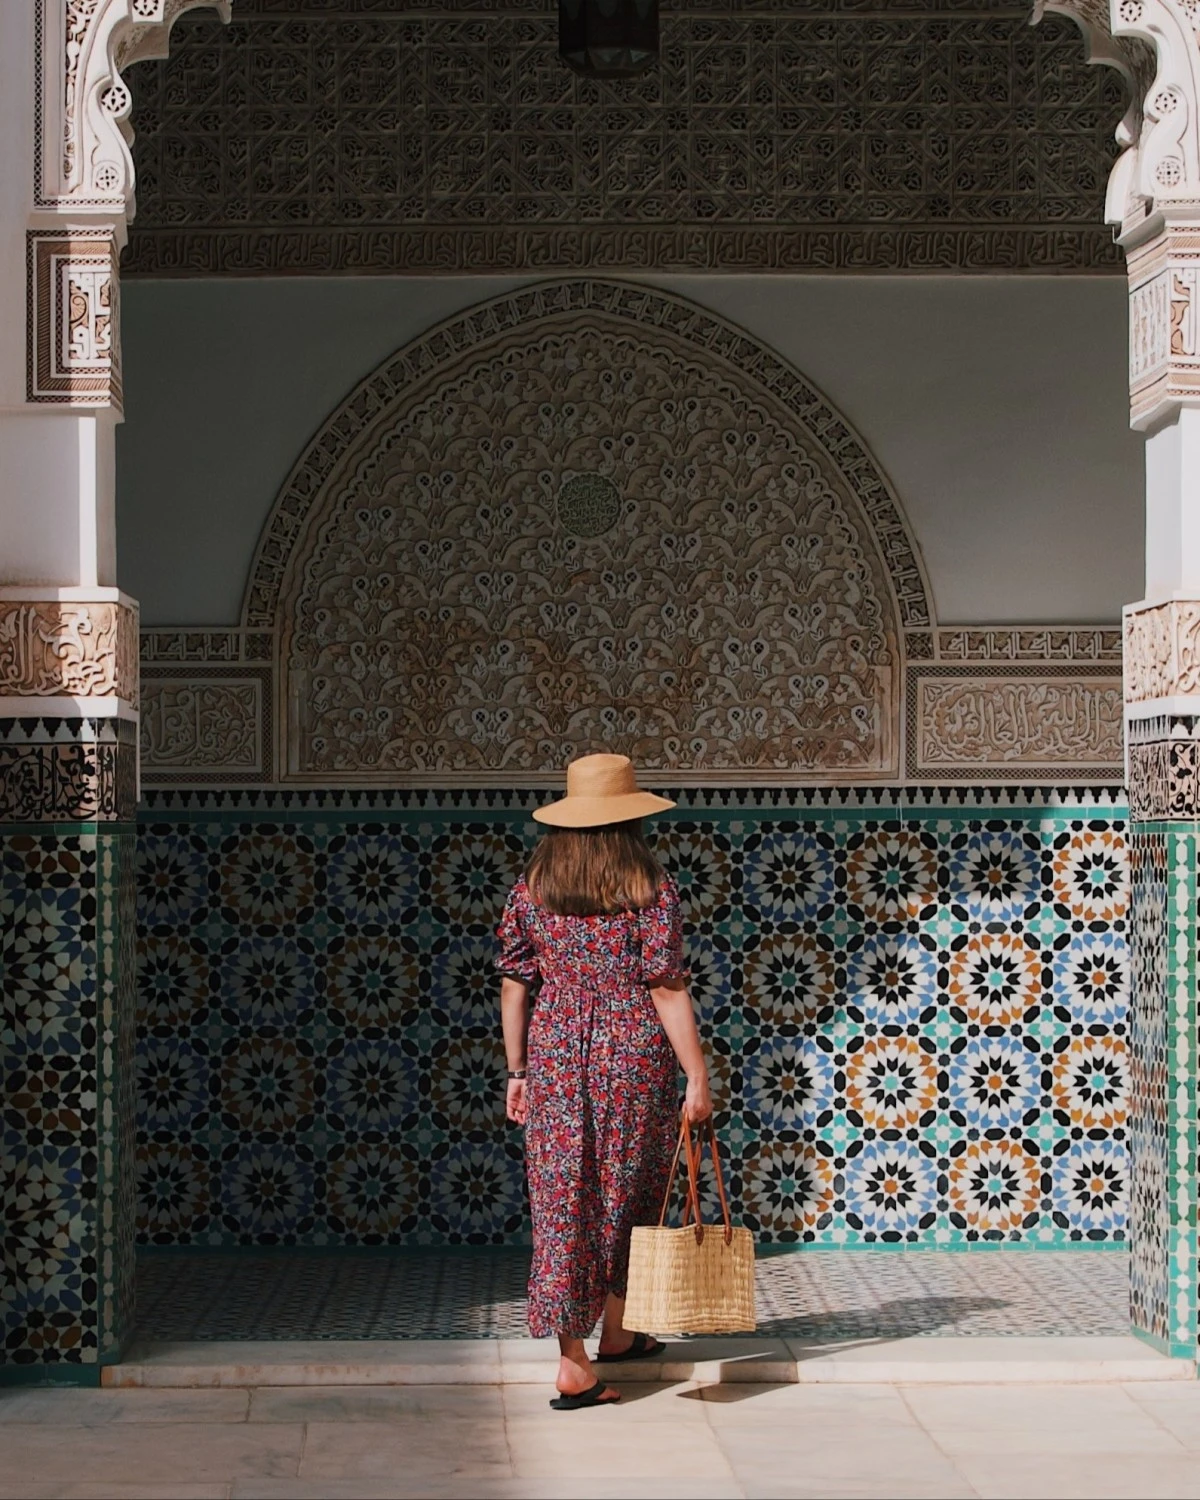 woman in a hat walks beneath a colorful archway